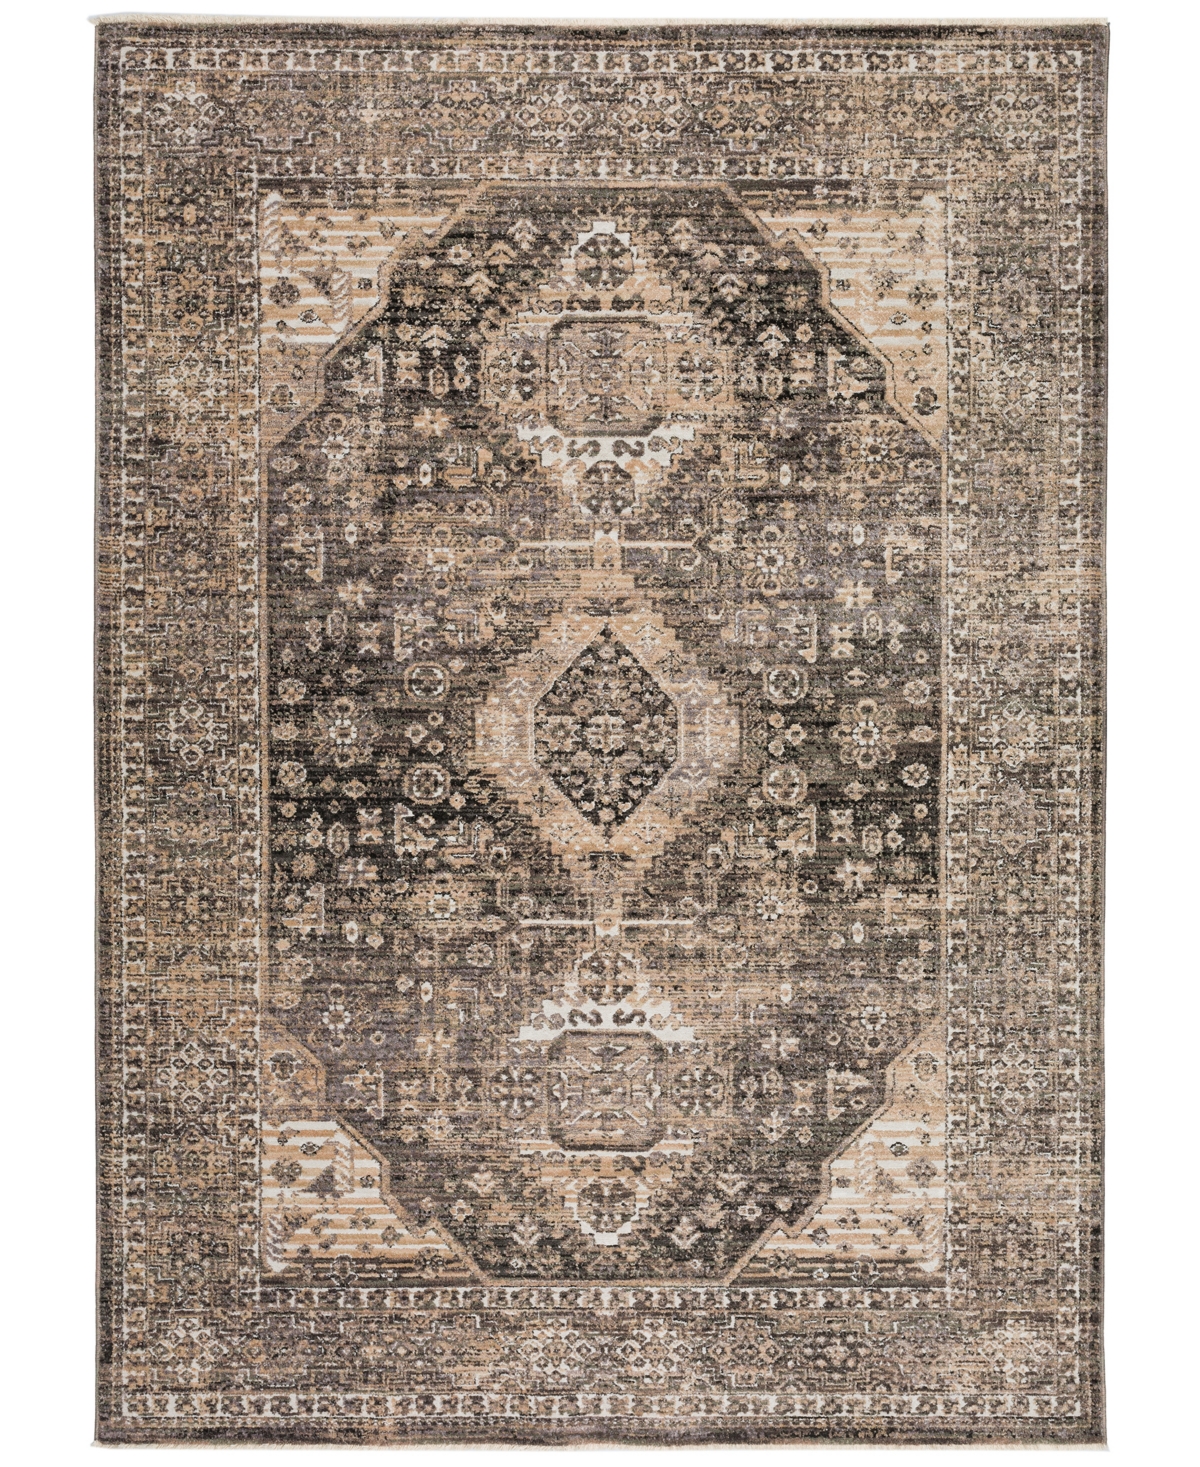 D Style Sergey Sgy2 9' X 12'6" Area Rug In Charcoal